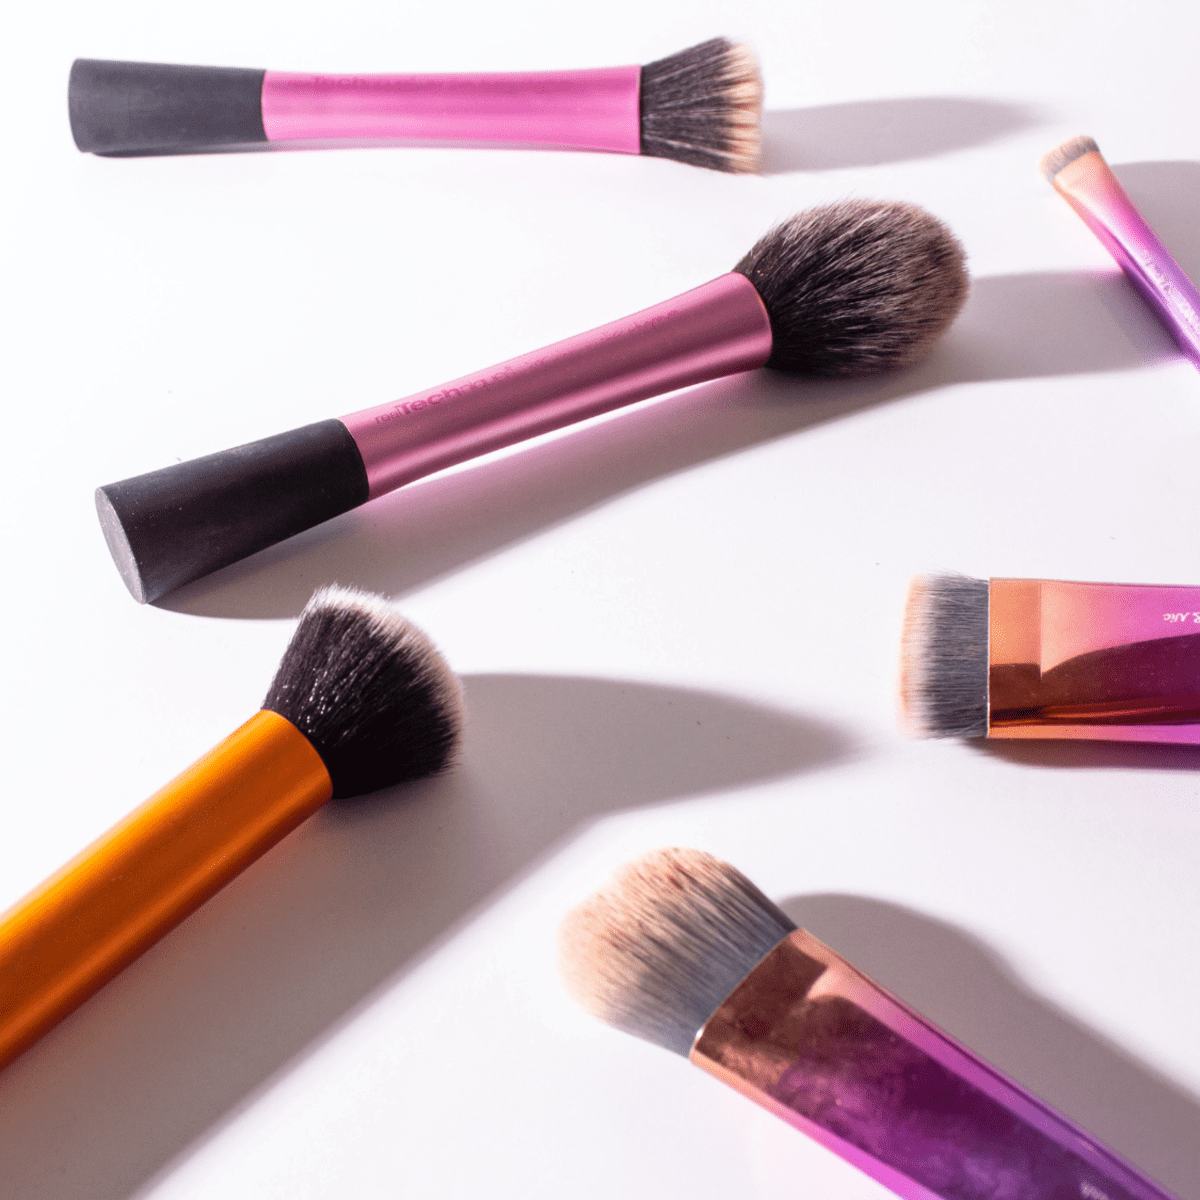 How To Make A Diy Makeup Brush Cleanser